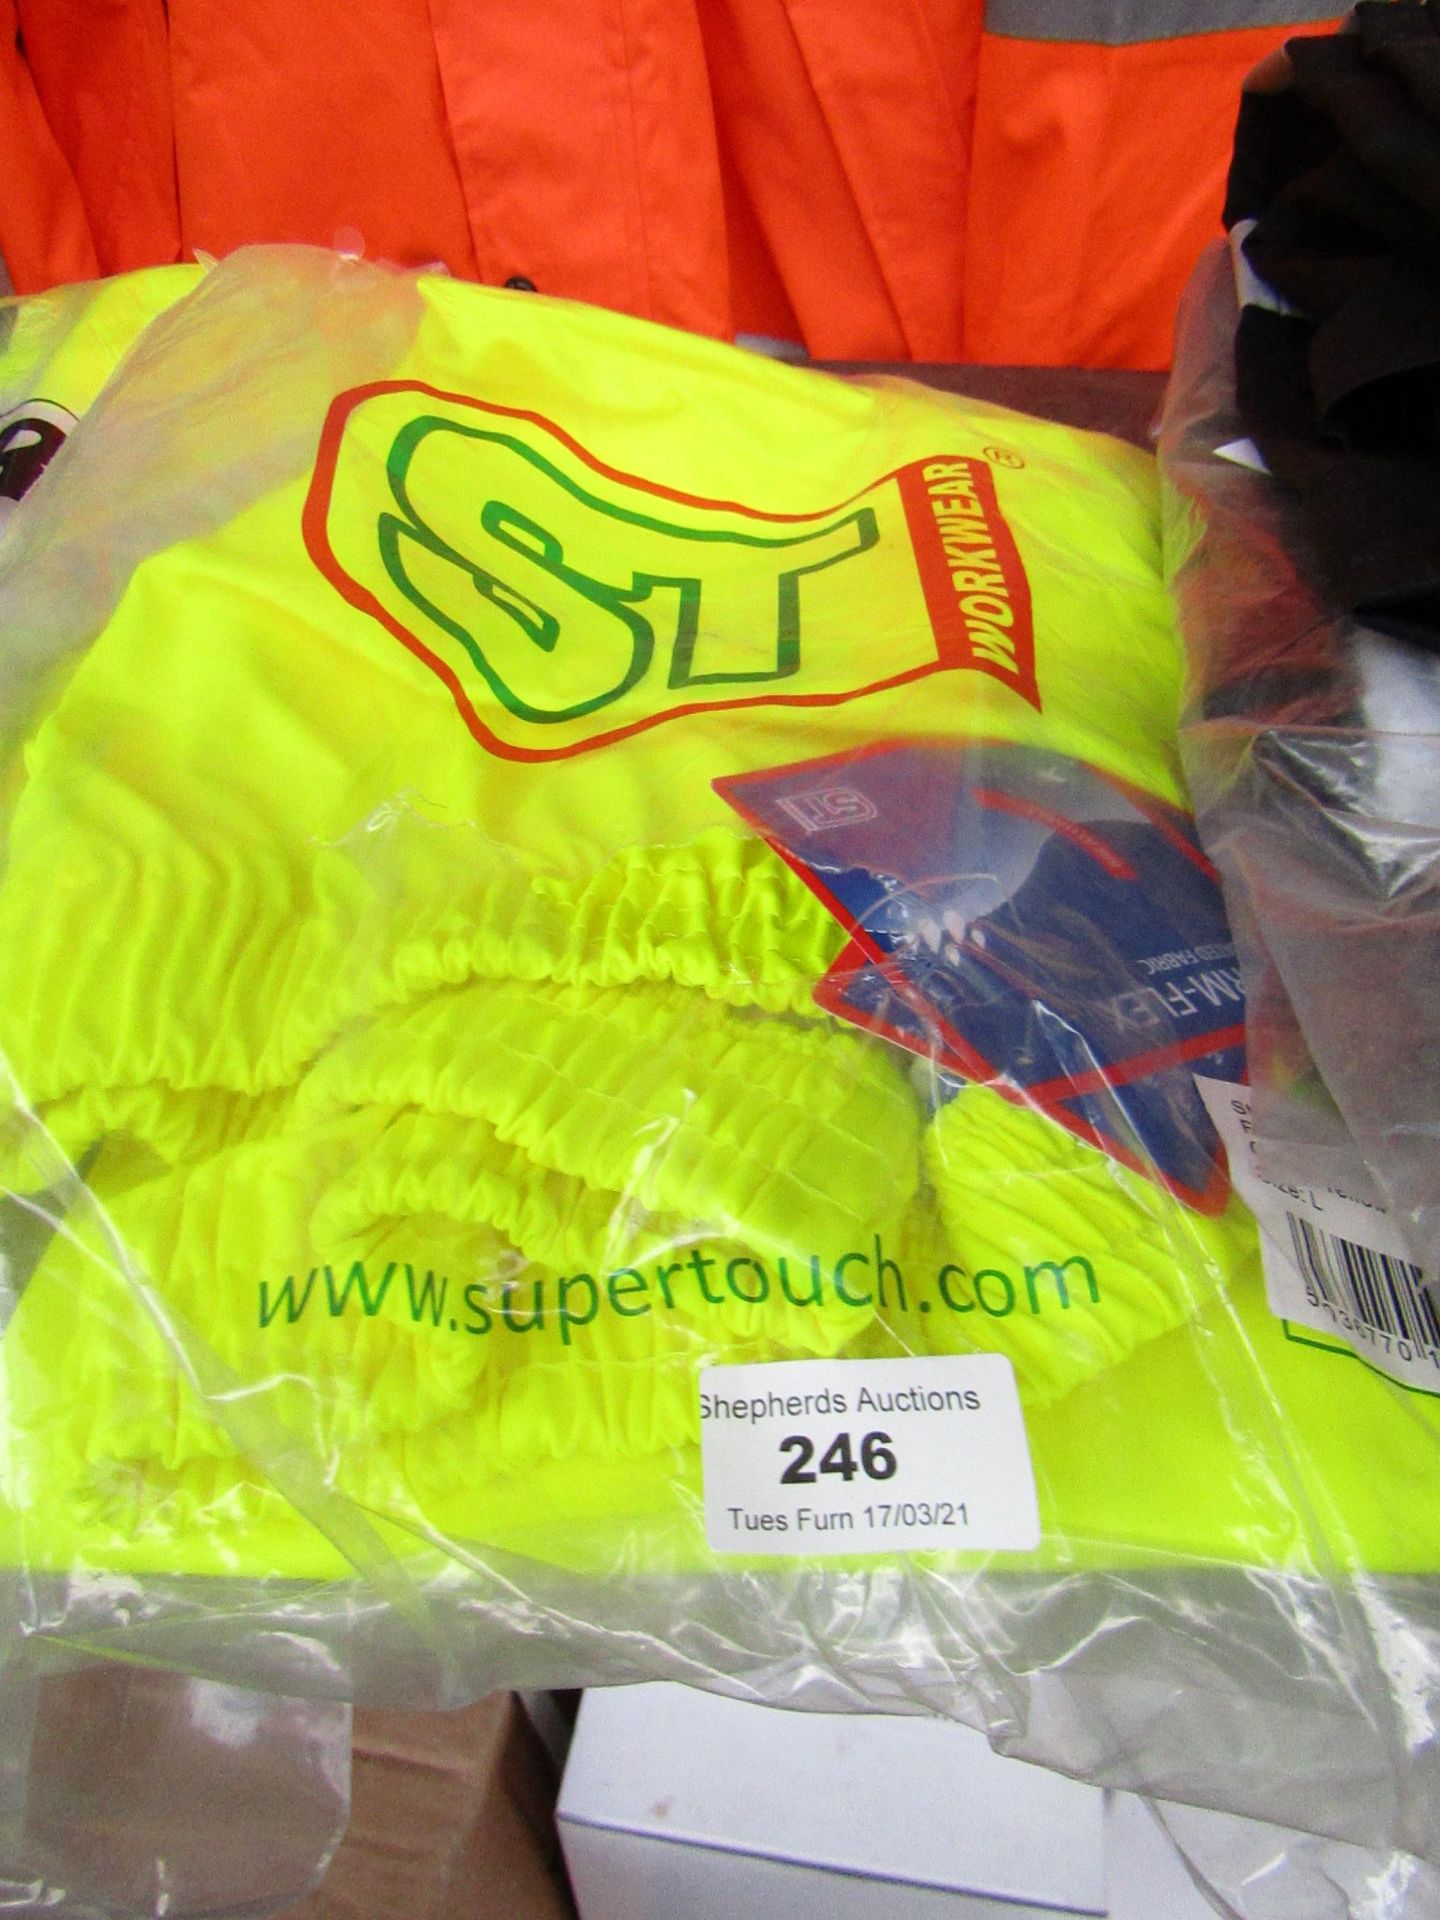 ST Workwear - PU Trousers Hi-Vis Yellow - Size Large - Unused & Packaged.